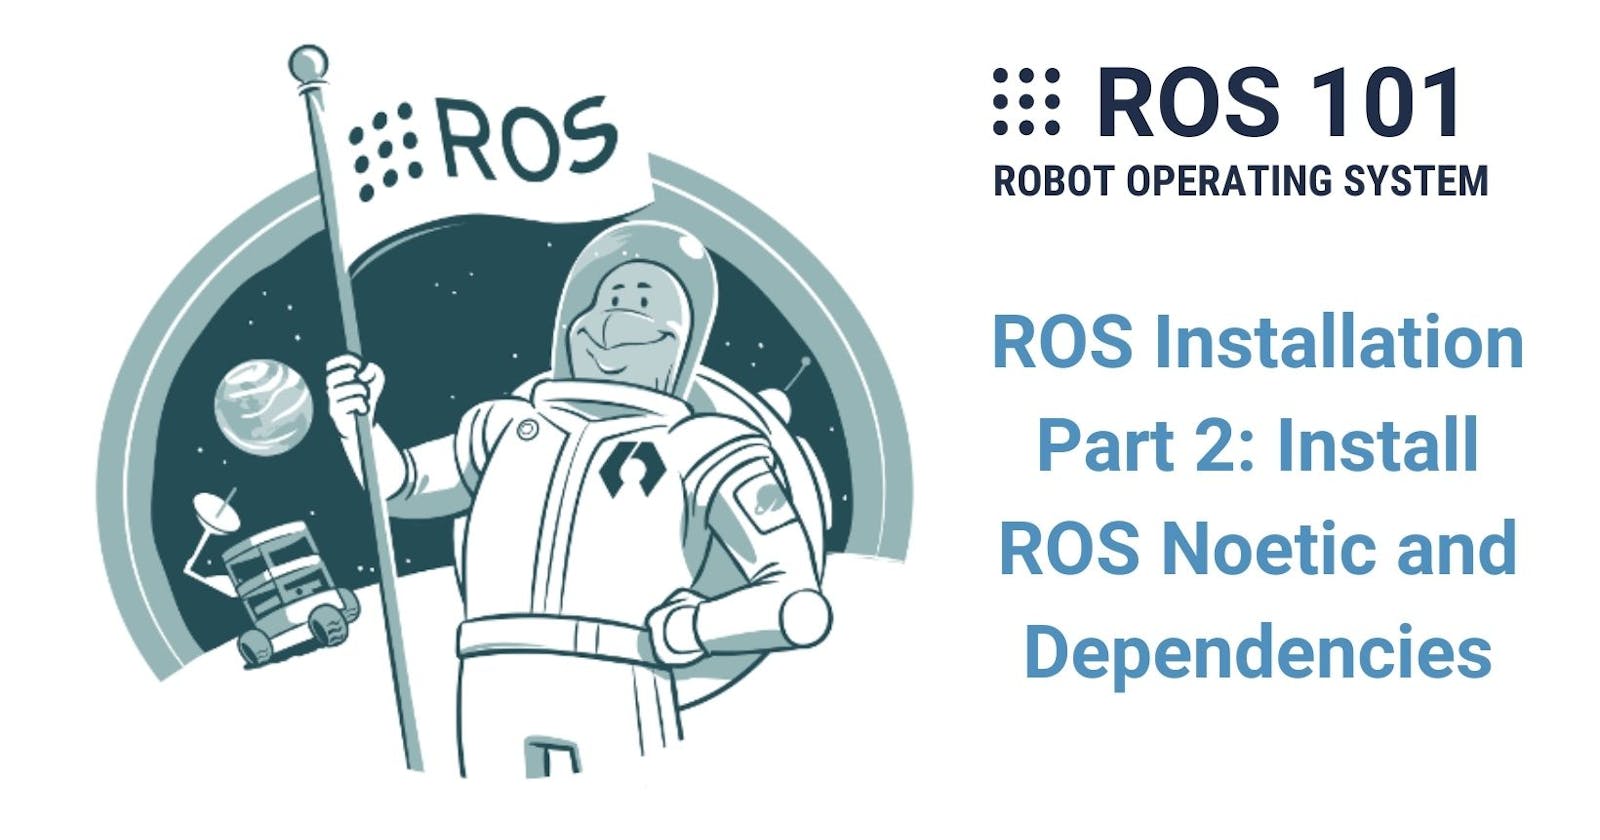 4. ROS Installation - Part 2: Install ROS Noetic and Dependencies